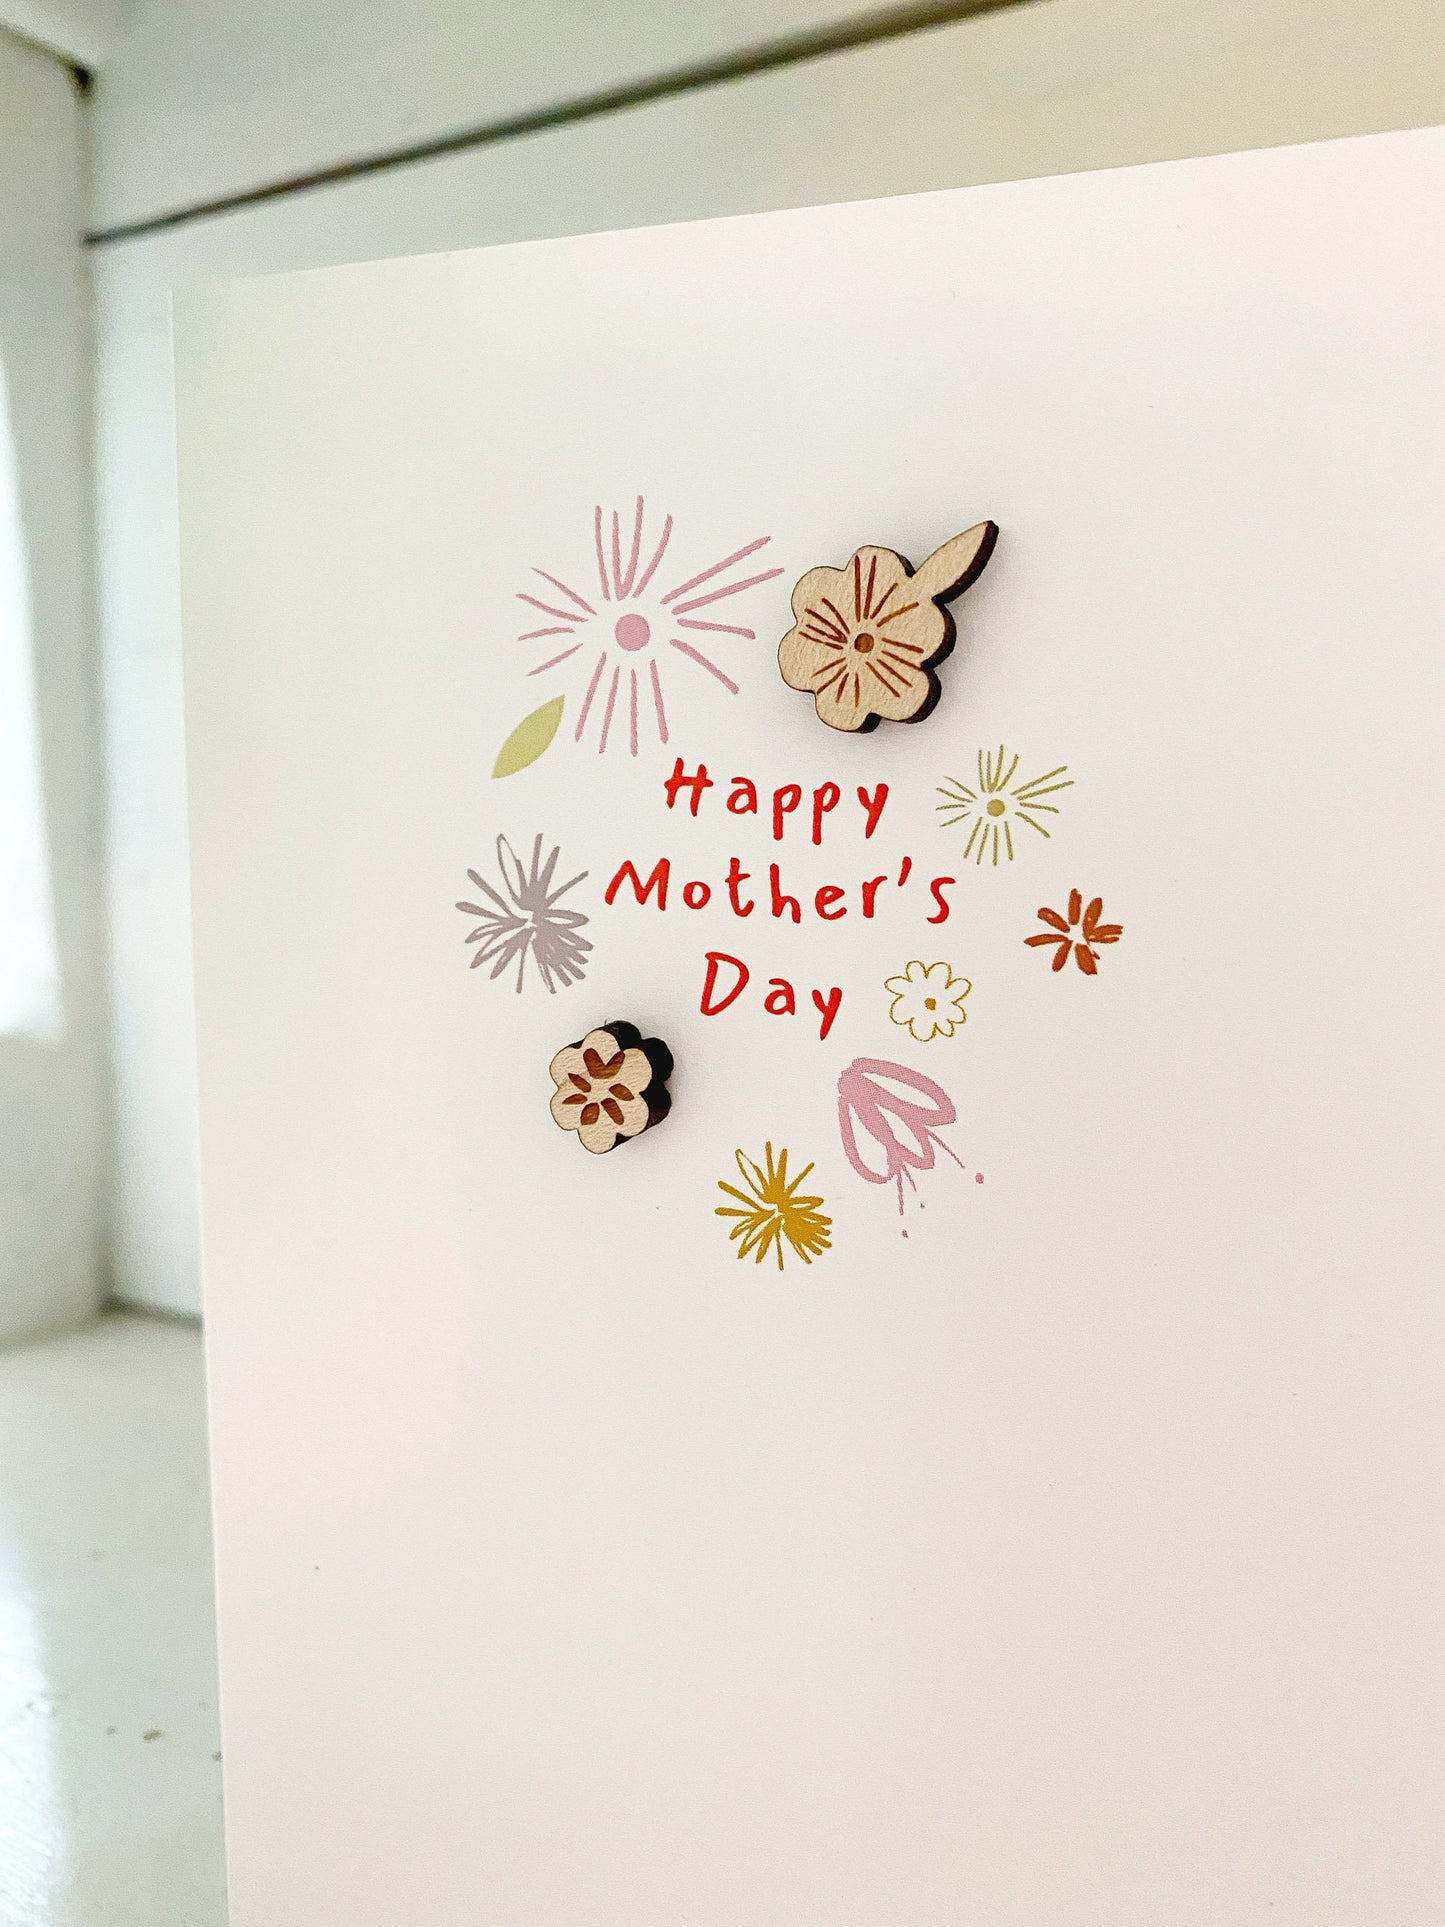 Happy Mother's Day pretty floral greeting card